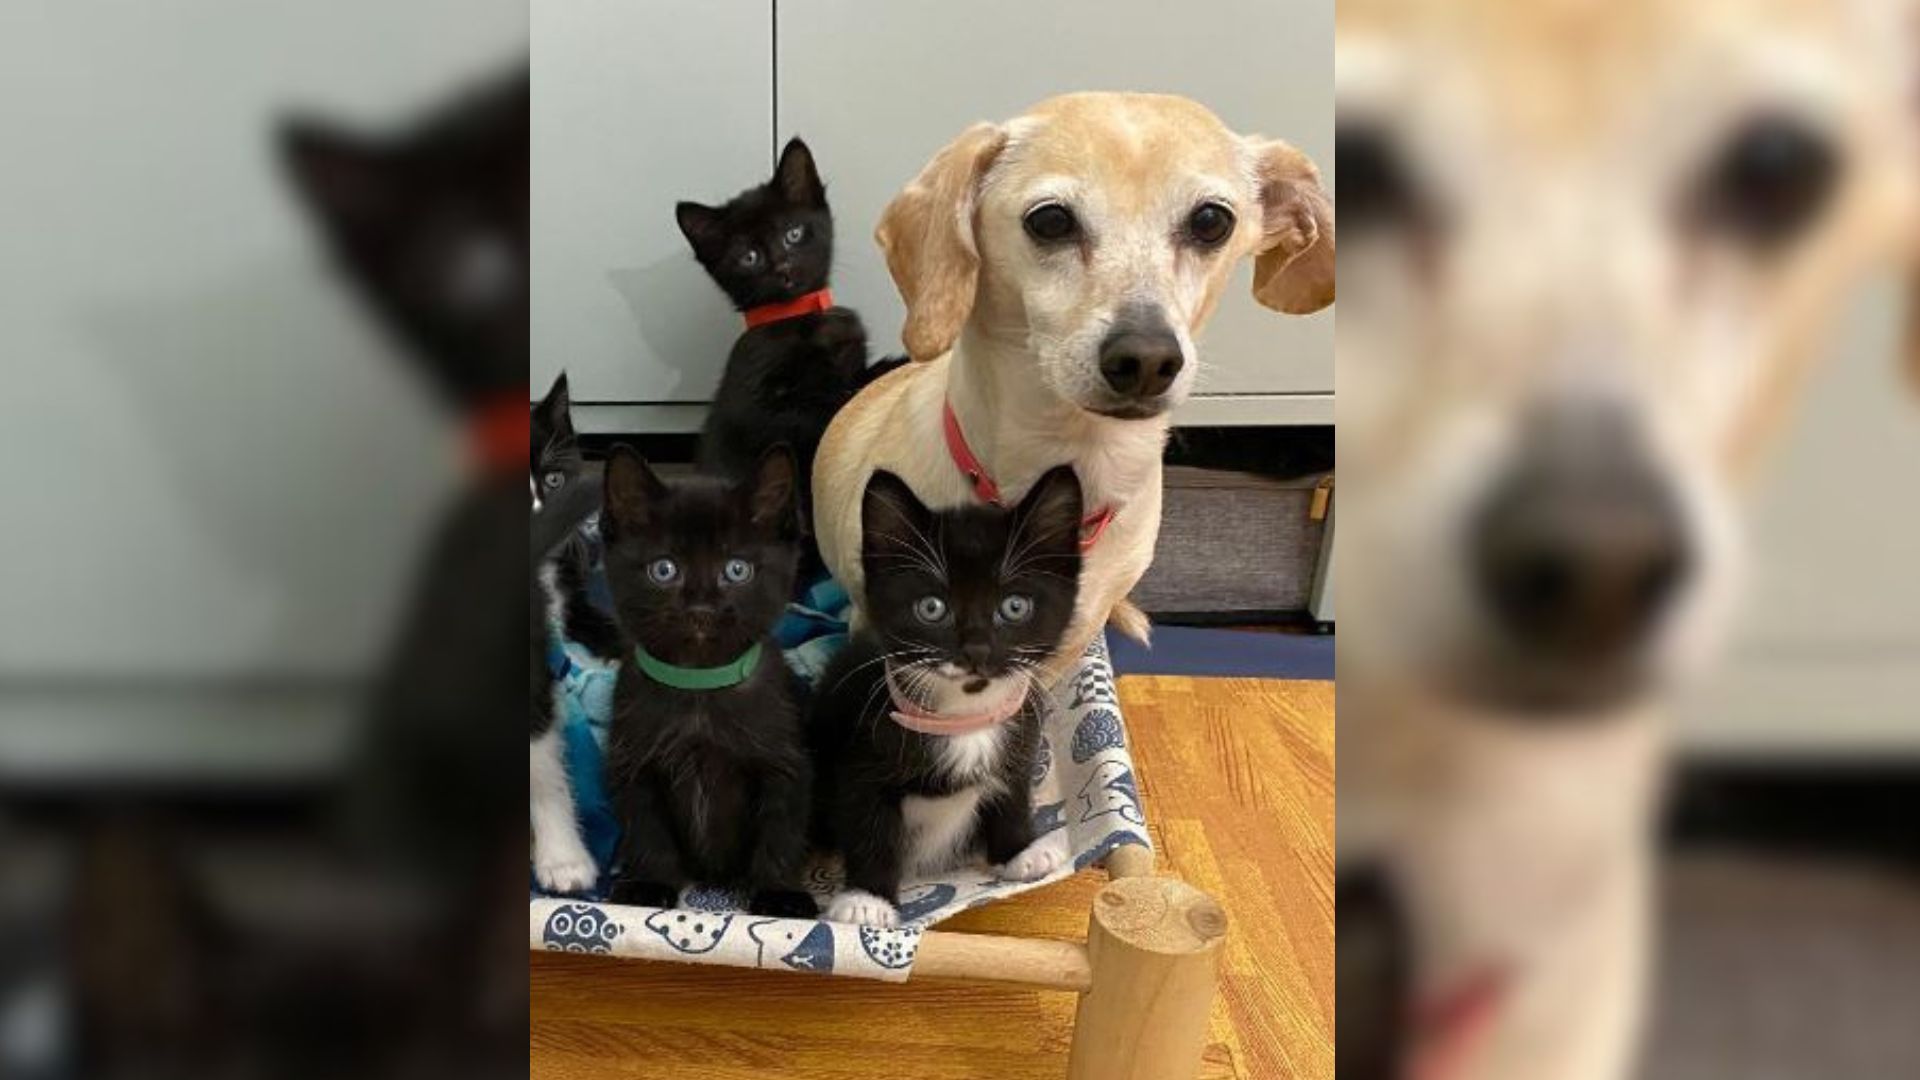 Kona, The Tiny Dog, Is The Sweetest Foster Mom For Kittens In Need